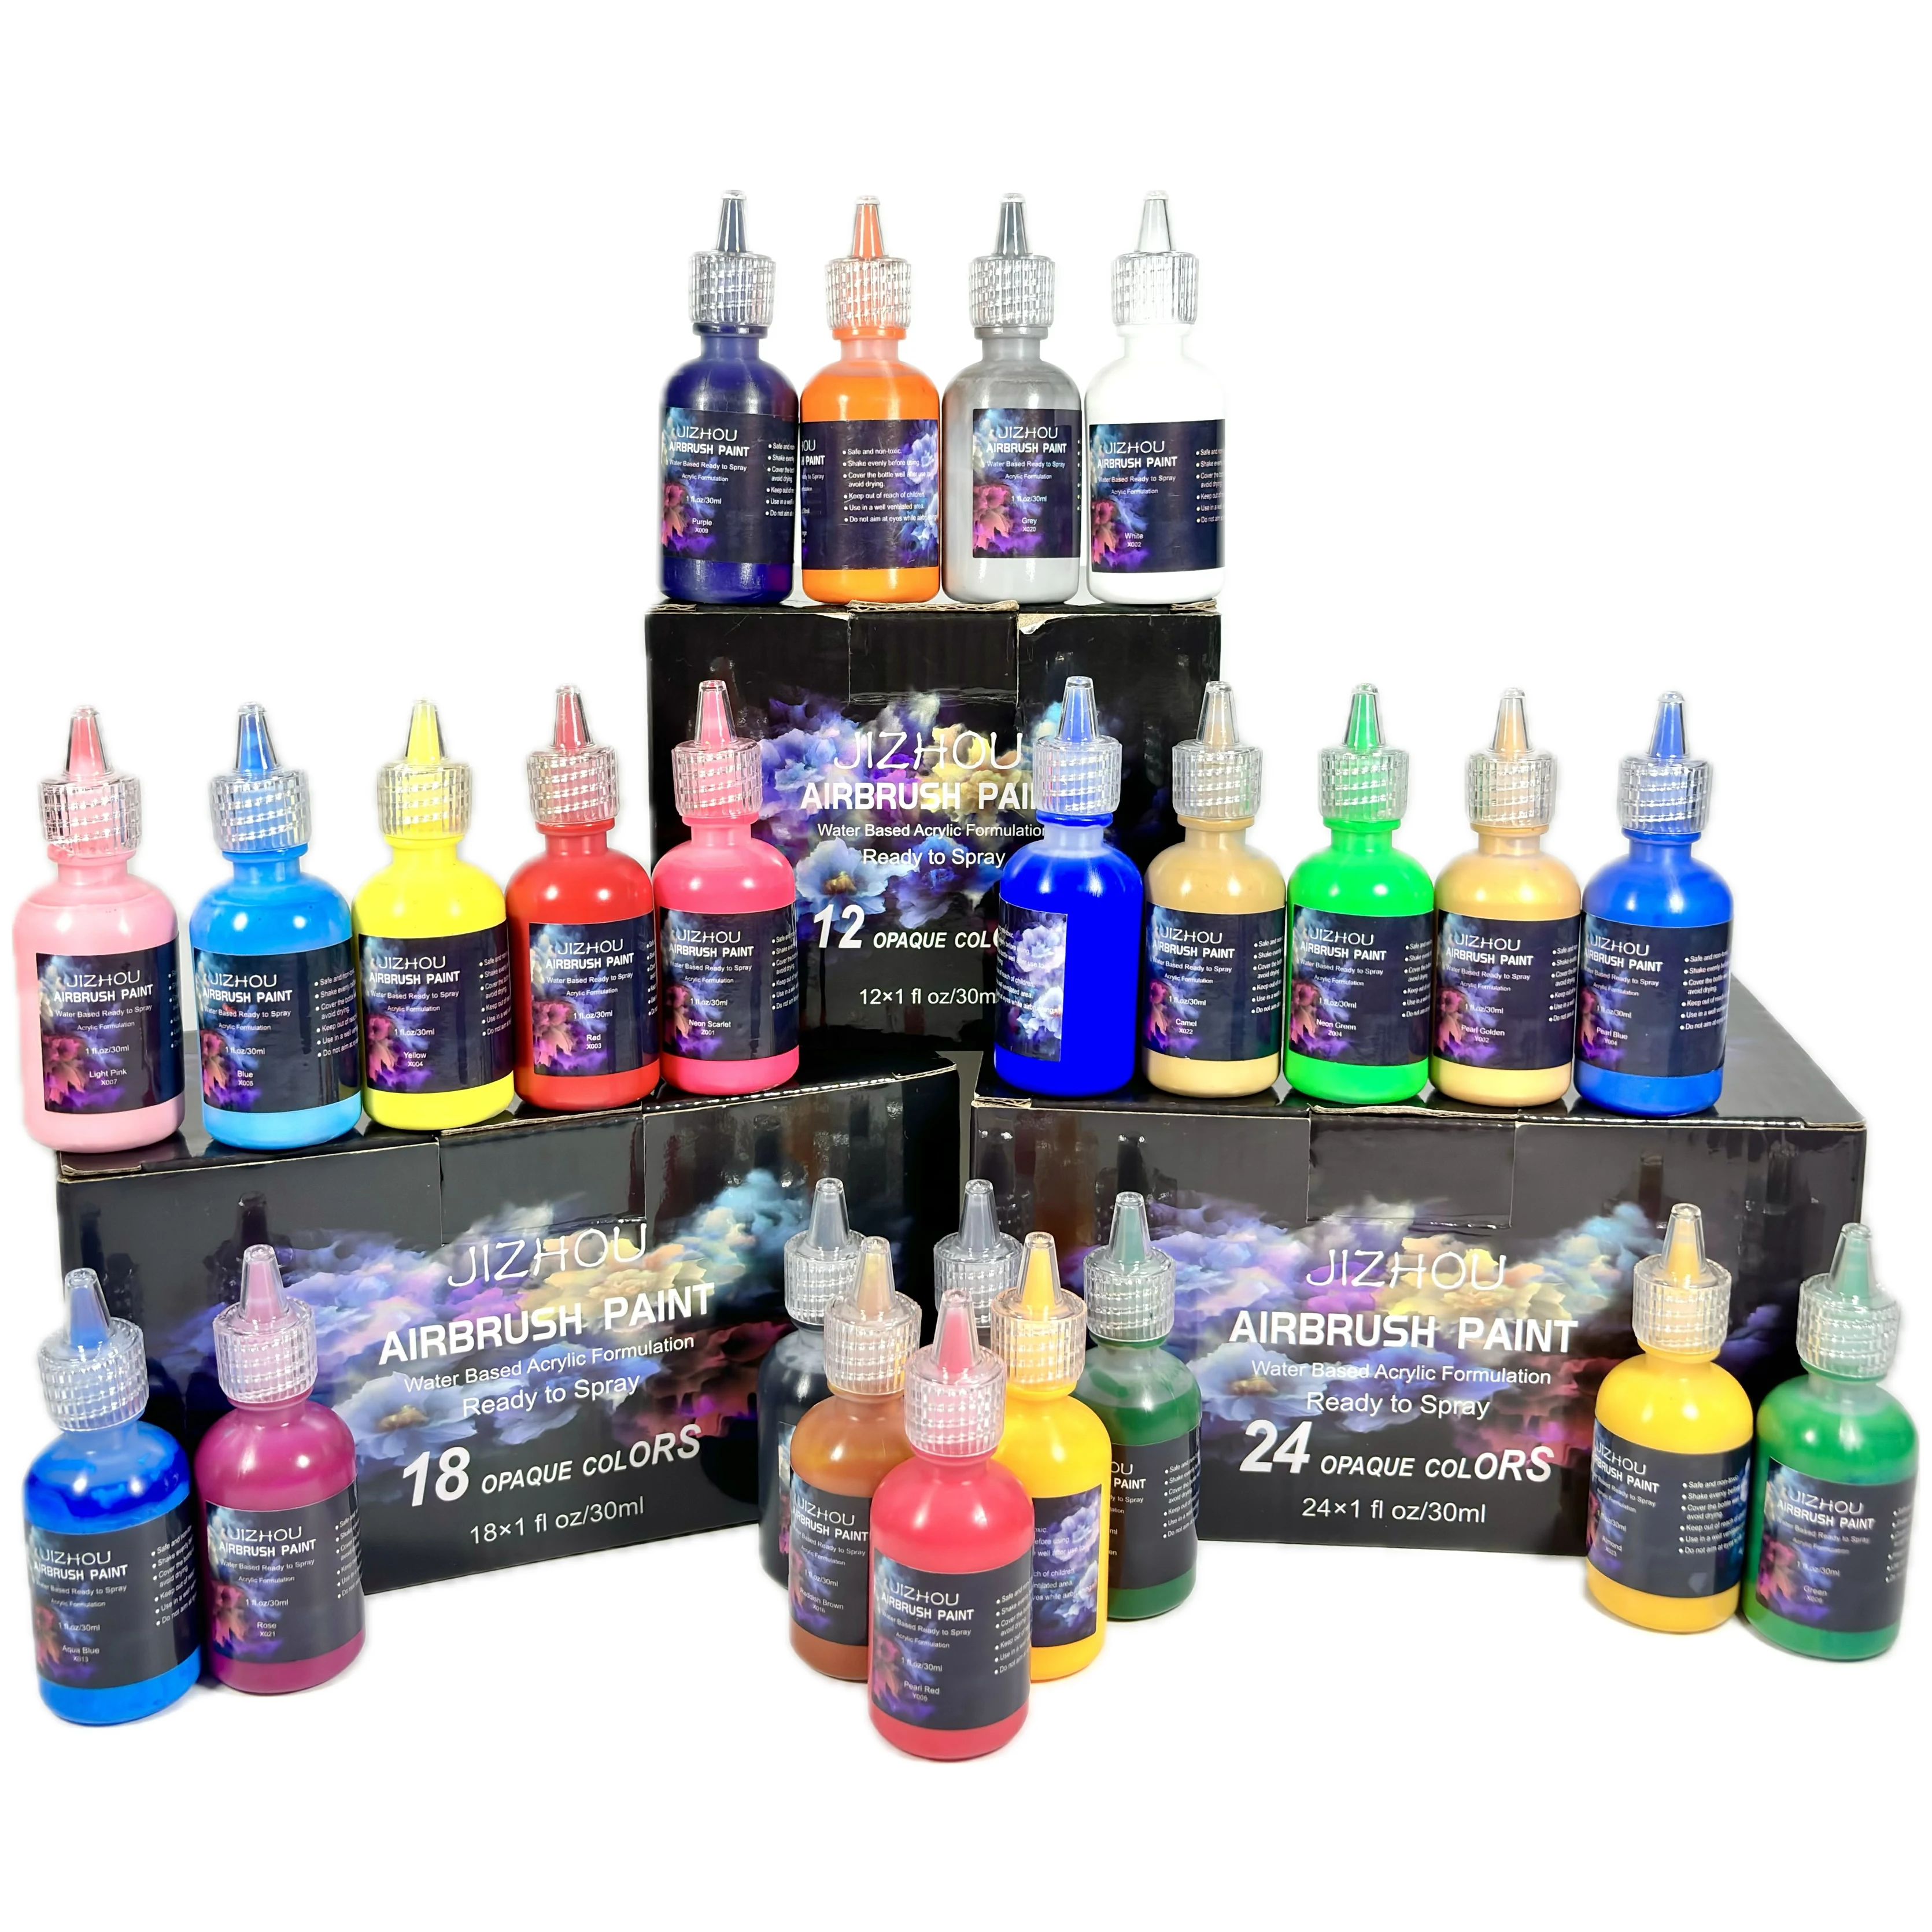 

JIZHOU 12/18/24 ColorsAirbrush Paint Set 30ml Fluorescent Colors Water-Based Acrylic Paint Kit for Hobbyist and Artists to Spray